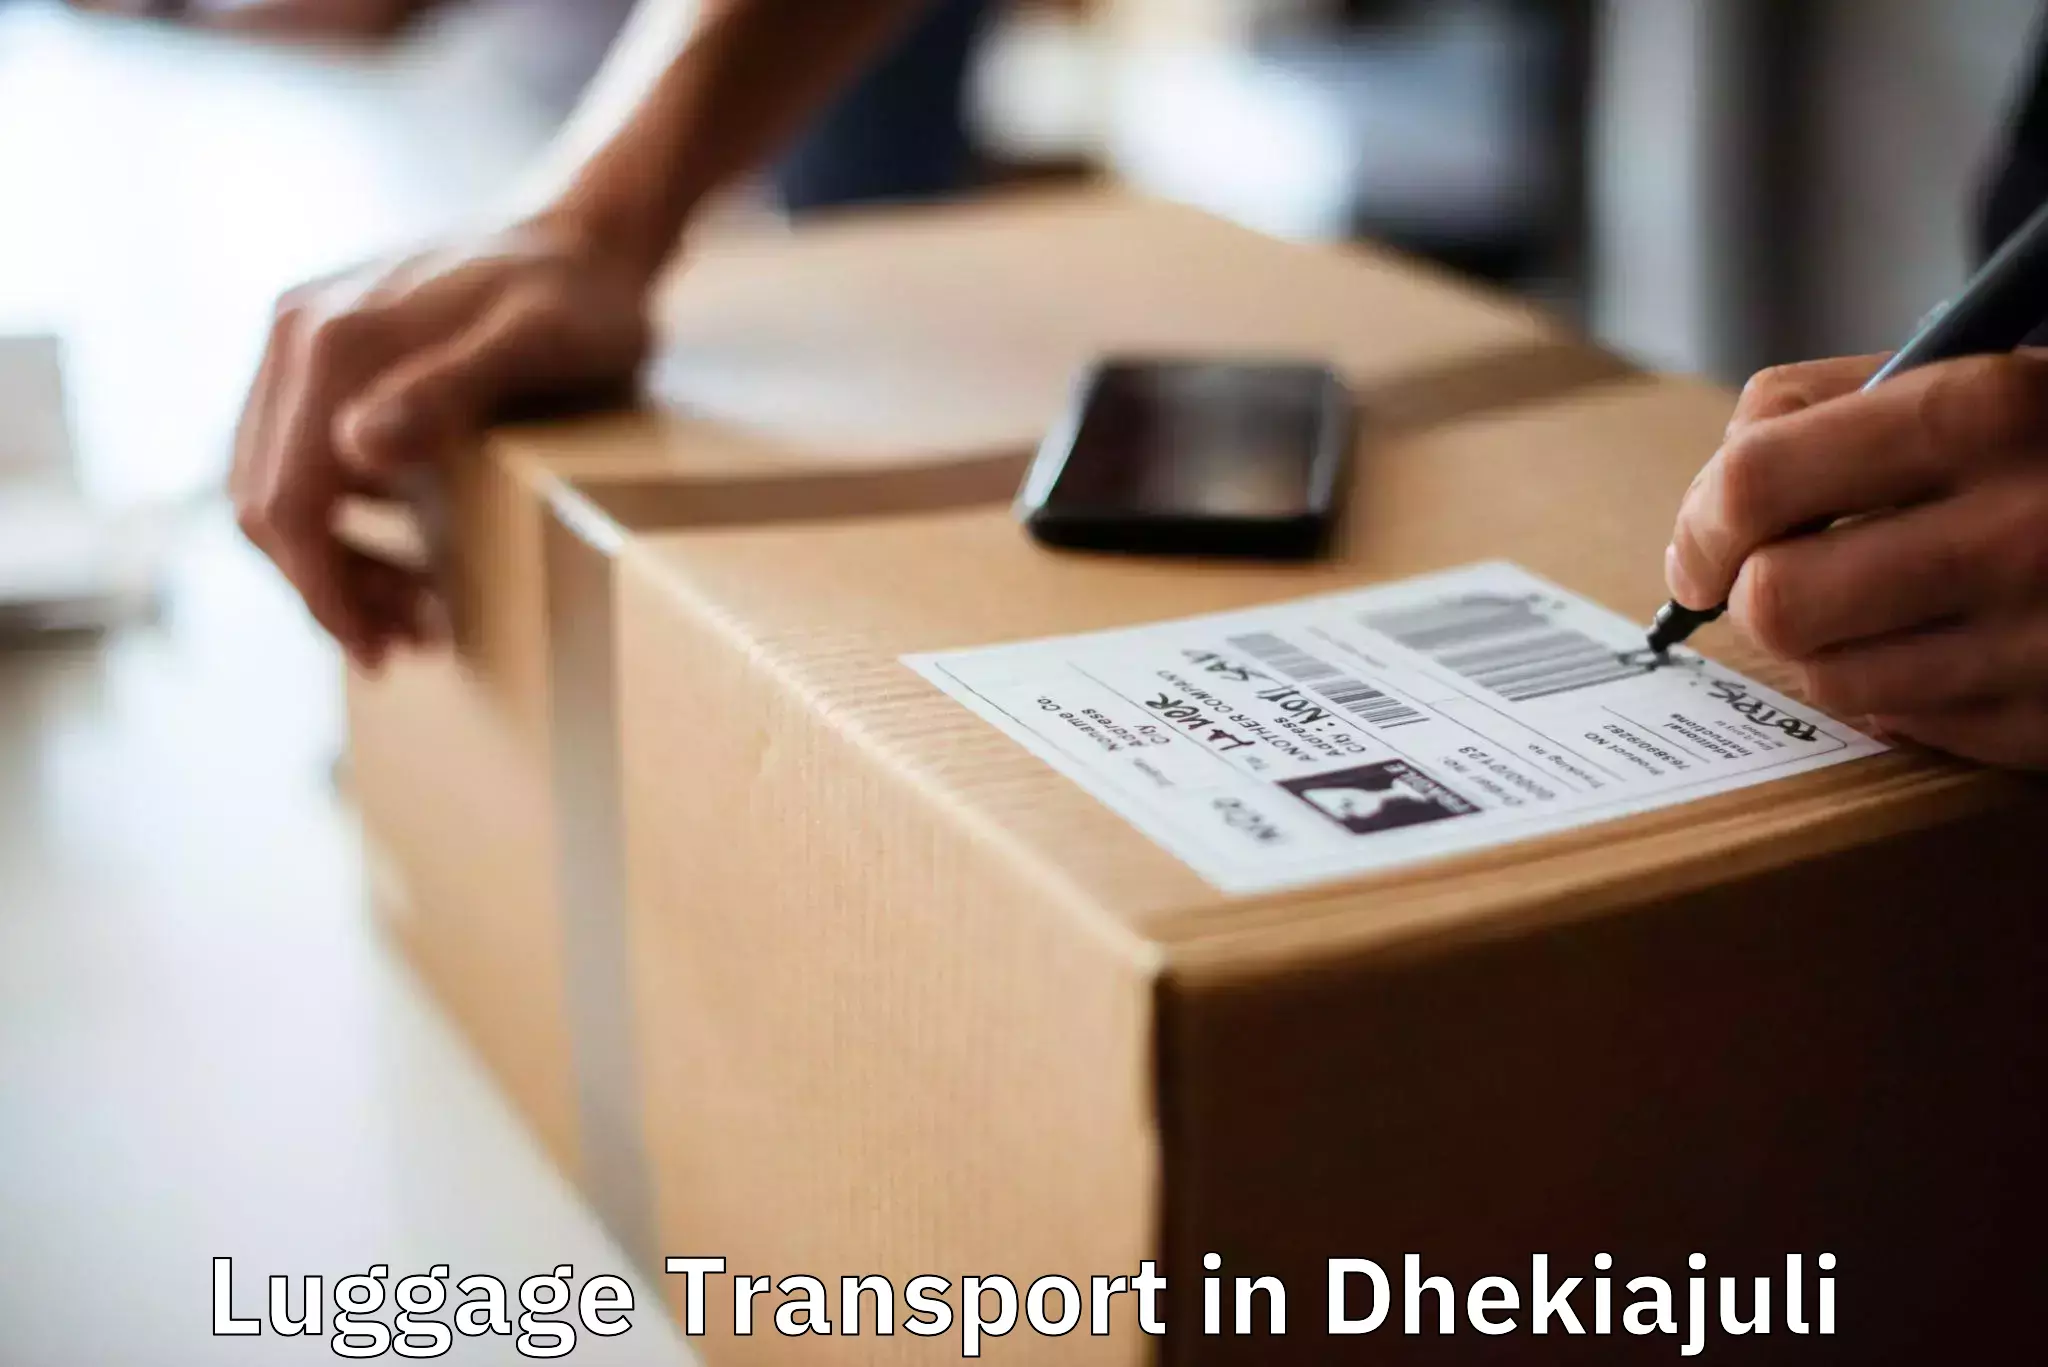 Luggage delivery operations in Dhekiajuli